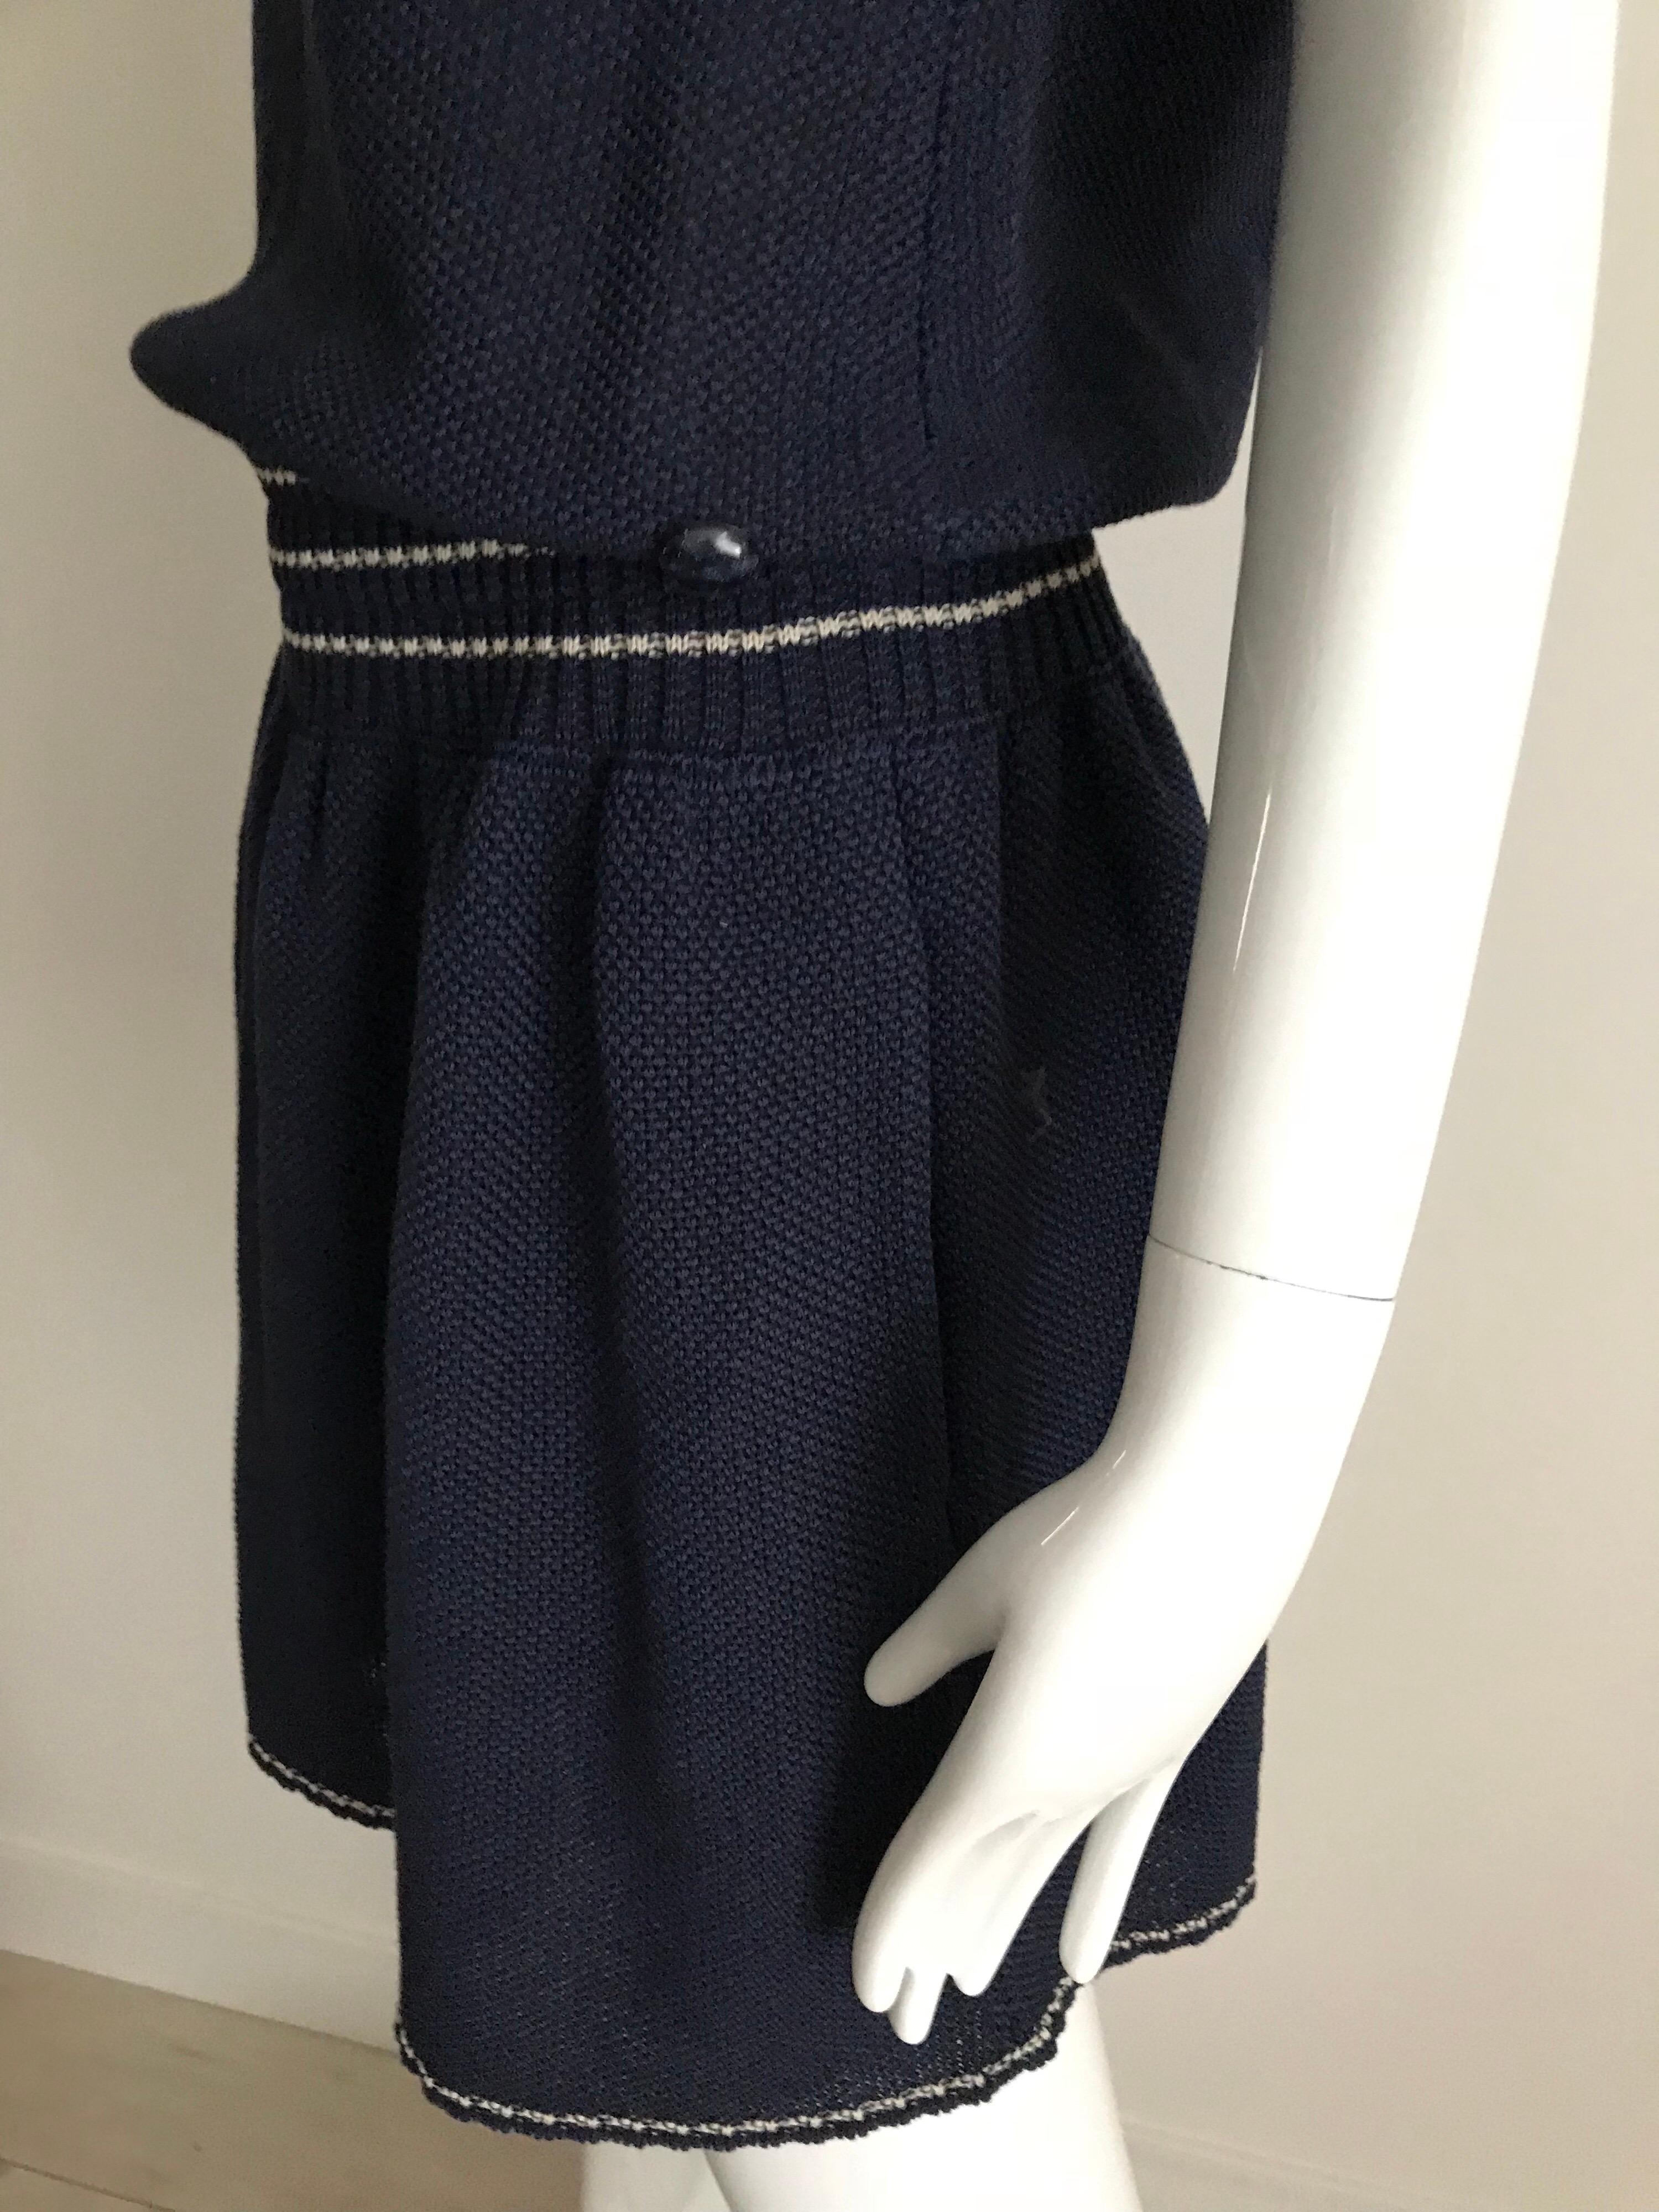  Chanel sleeveless Navy blue knit dress with blue and white piping tassel on the sleeve and collar. Fun casual attire.  Marked size: 42F/ Medium
Bust: 36-38 inches  
